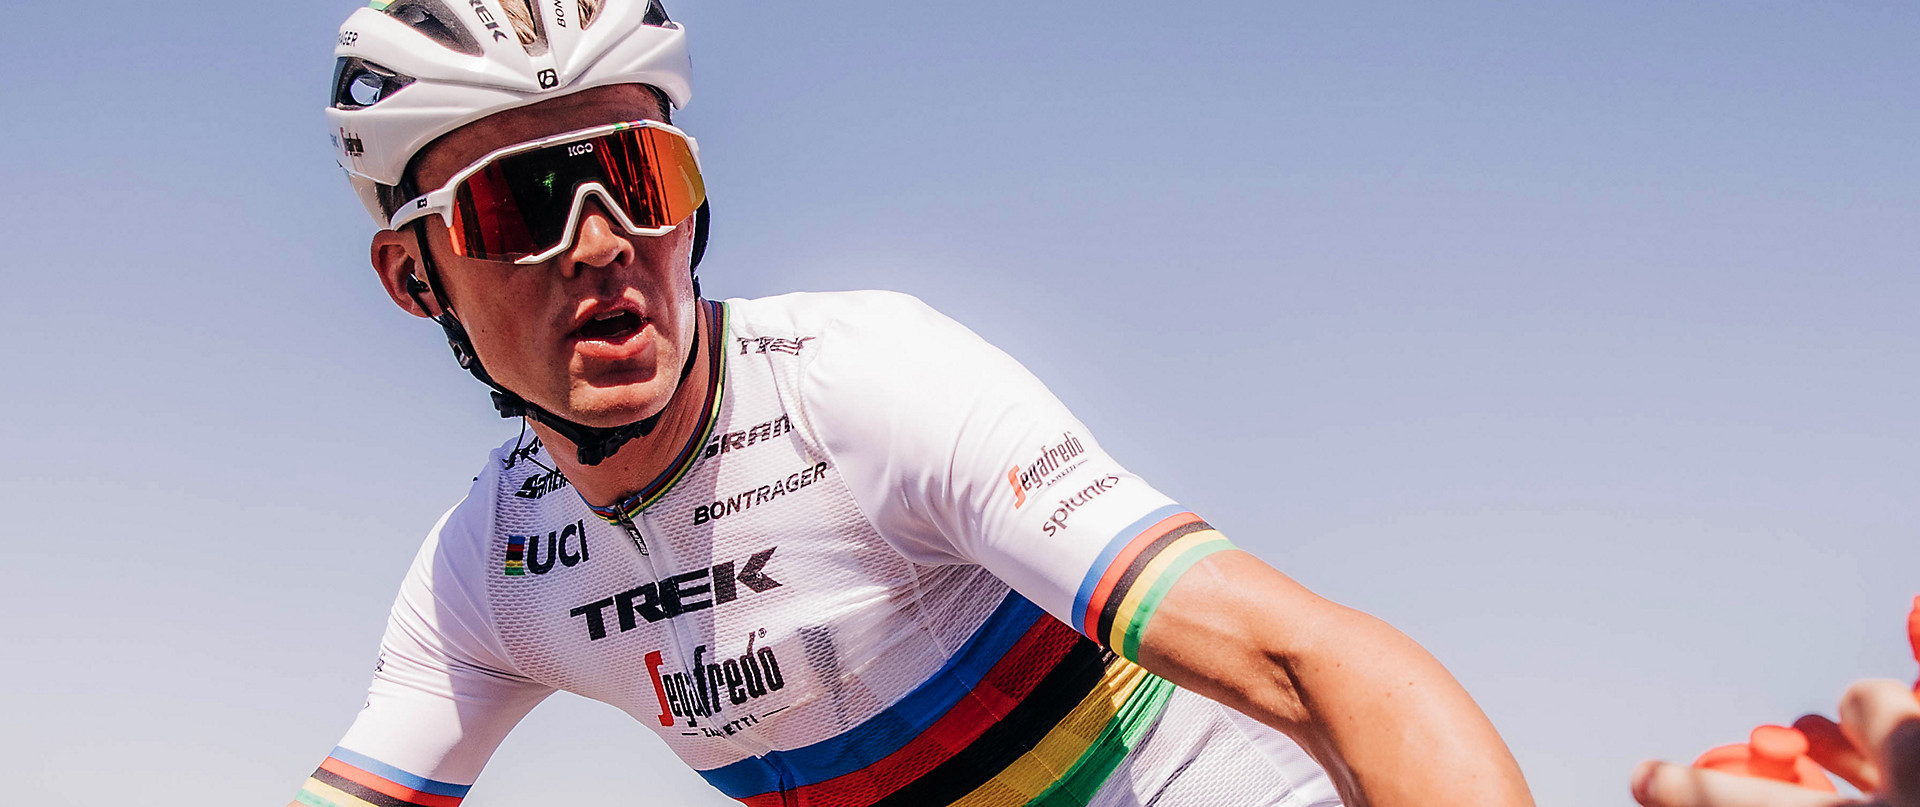 Mads Pedersen in his rainbow jersey, sunglasses, and a helmet.